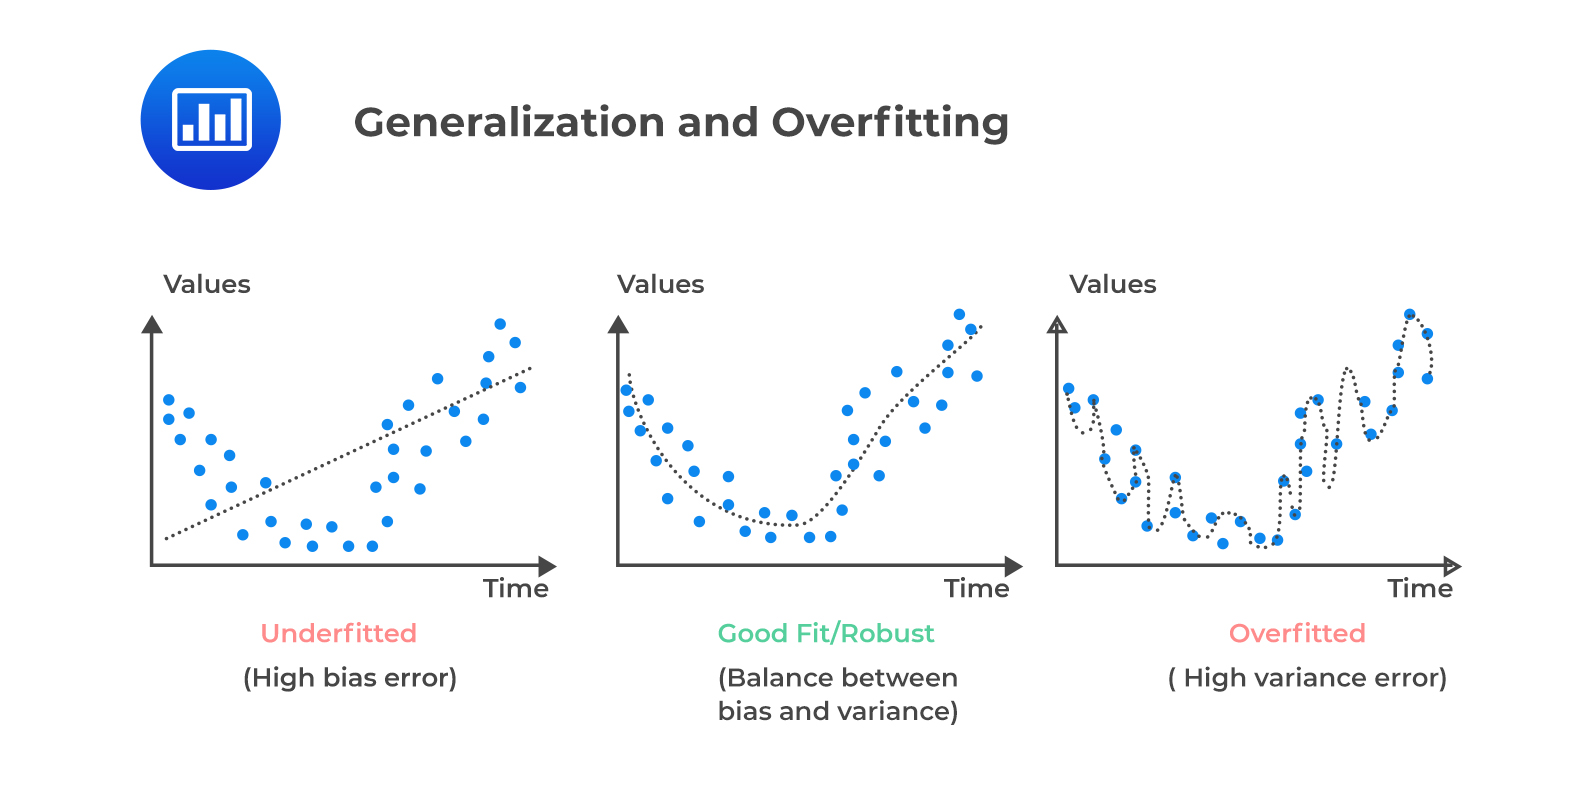 Generalization and Overfitting